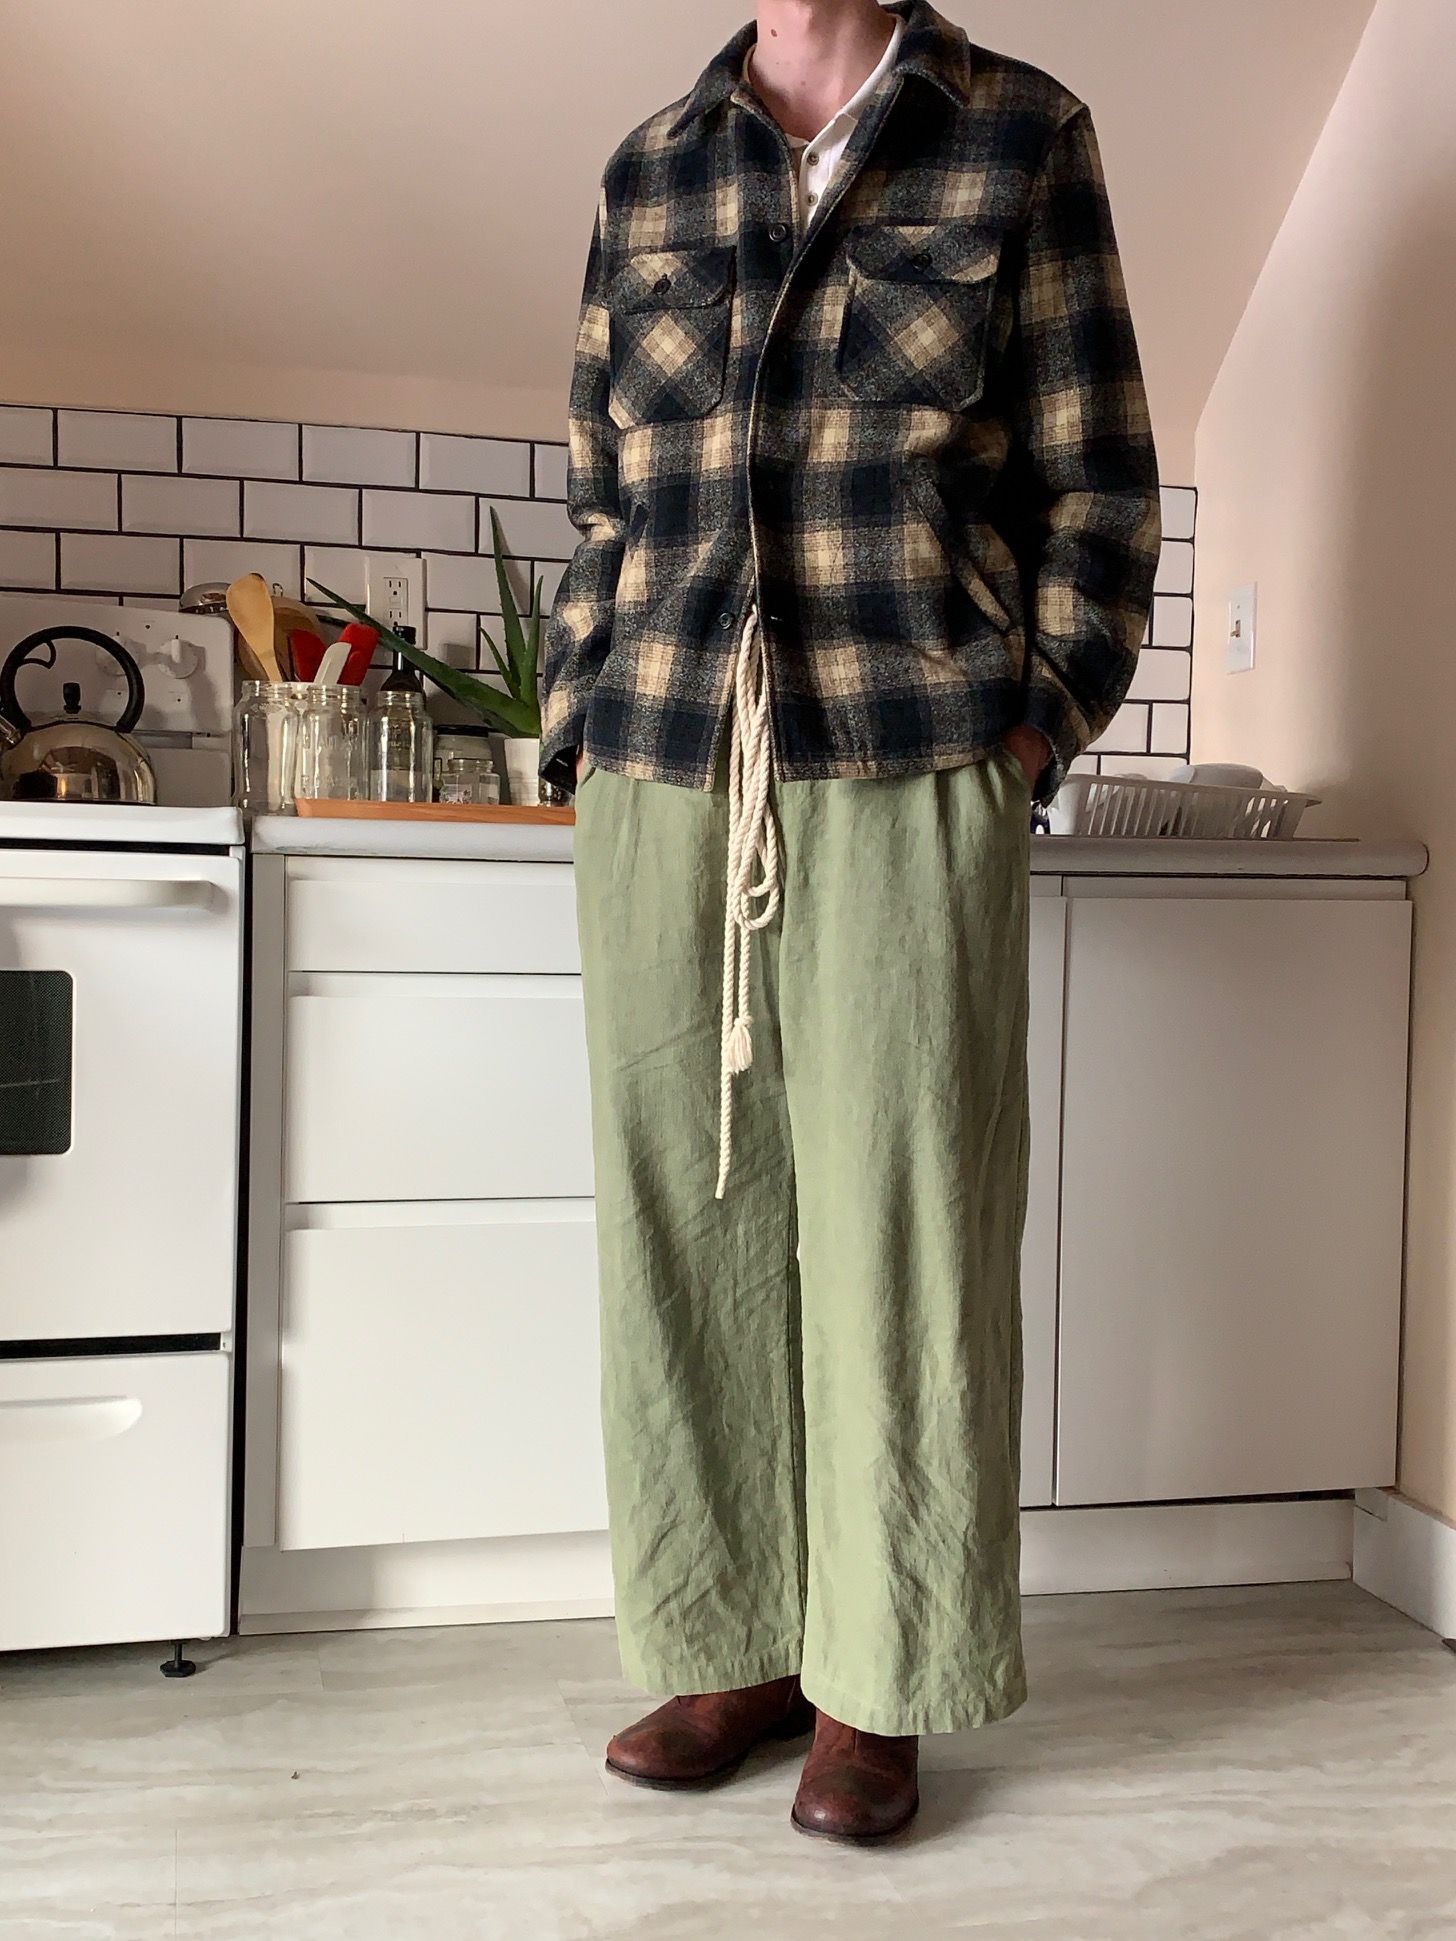 The Diner Trouser is ready for testing! Its a slim wideleg pant